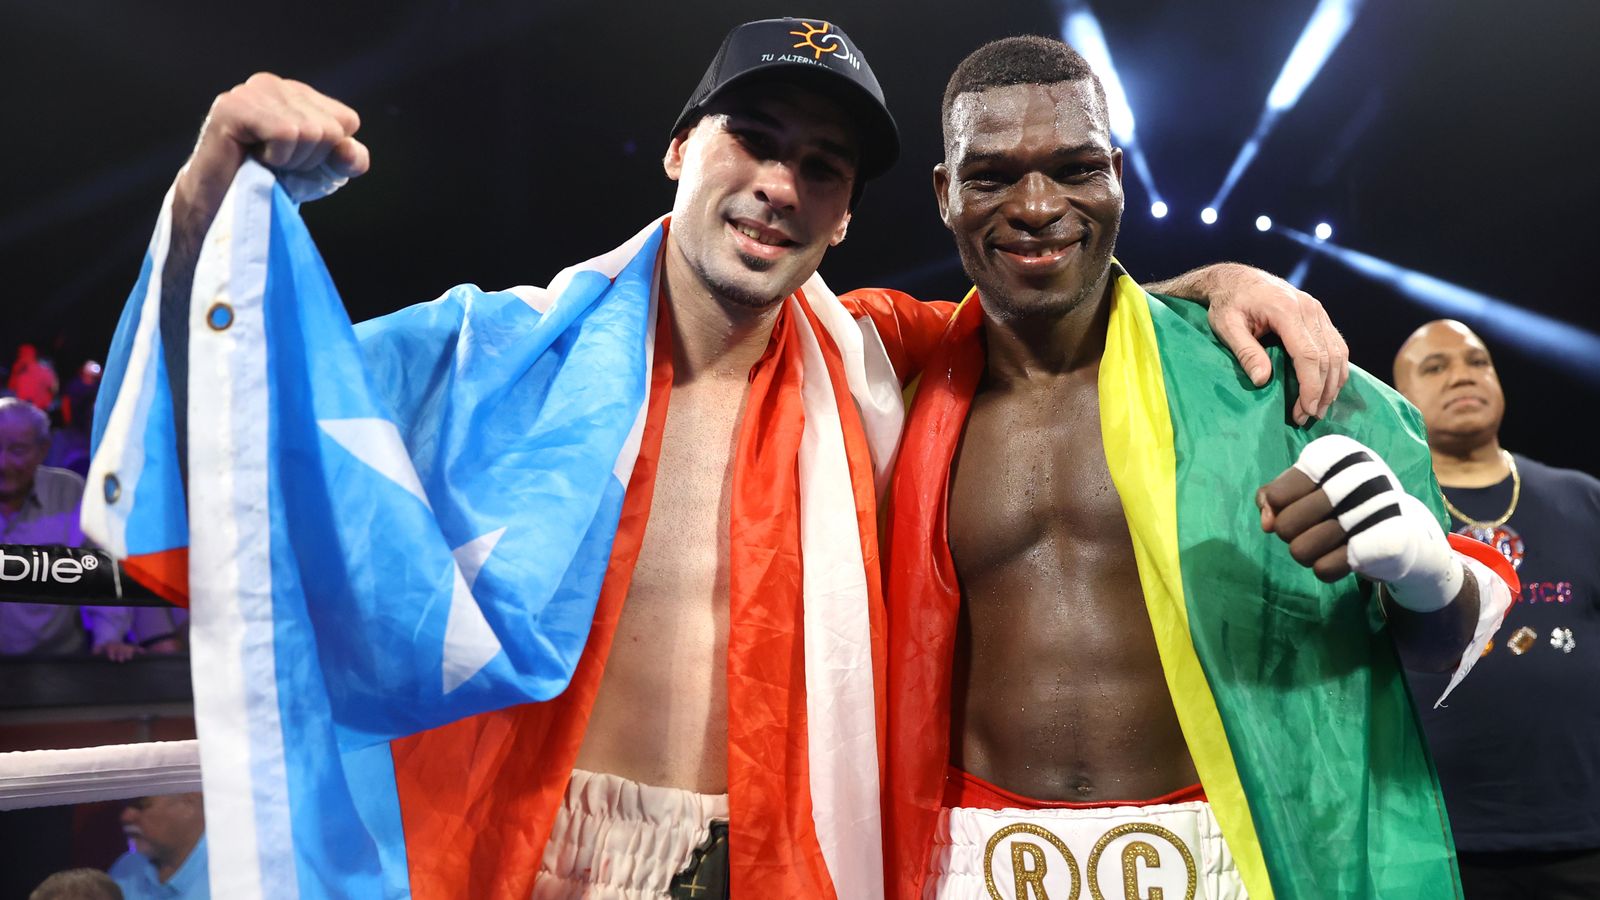 Jose Pedraza and Richard Commey throw over 1100 punches in high-stakes Oklahoma showdown